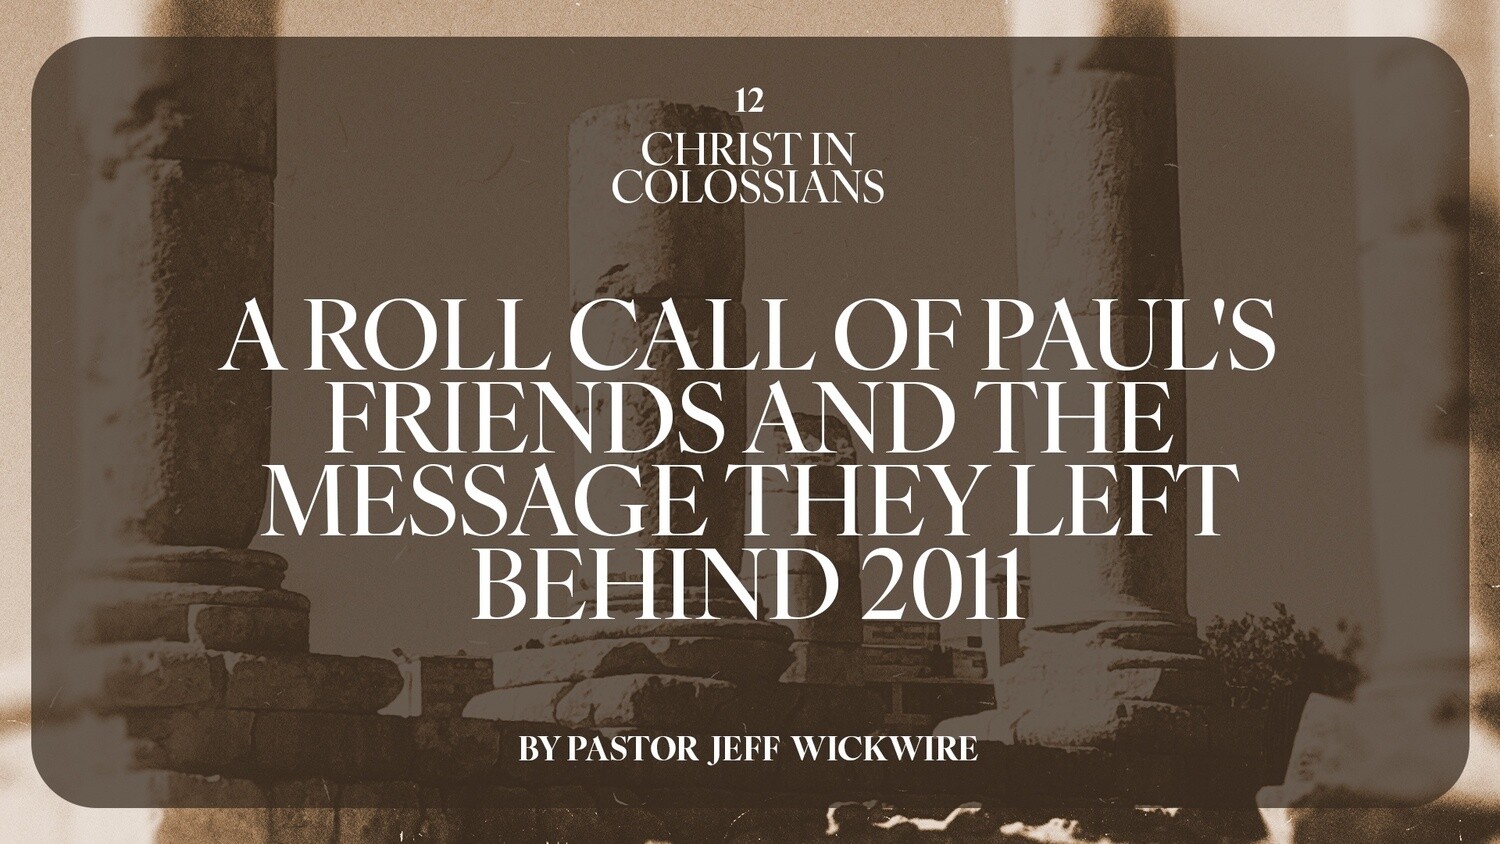 12 - A Roll Call Of Paul's Friends And The Message They Left Behind 2011 By Pastor Jeff Wickwire